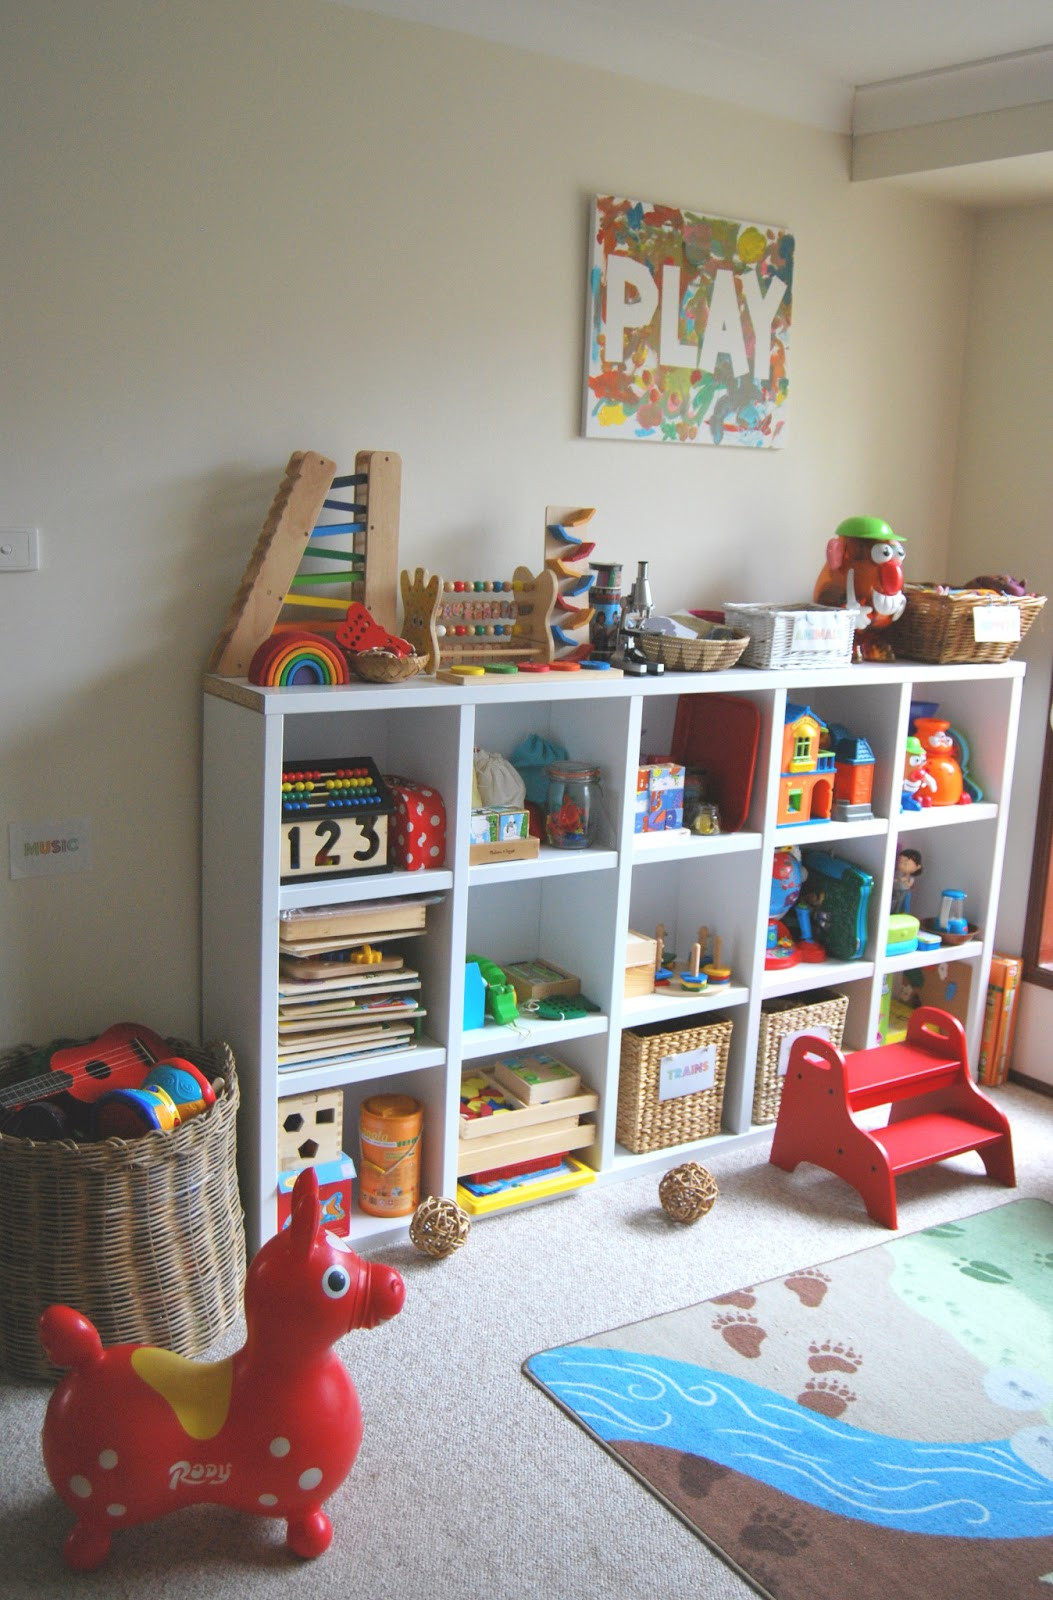 Kids Room Toy Storage
 A Little Learning For Two Play Room Tour PART 3 Toy